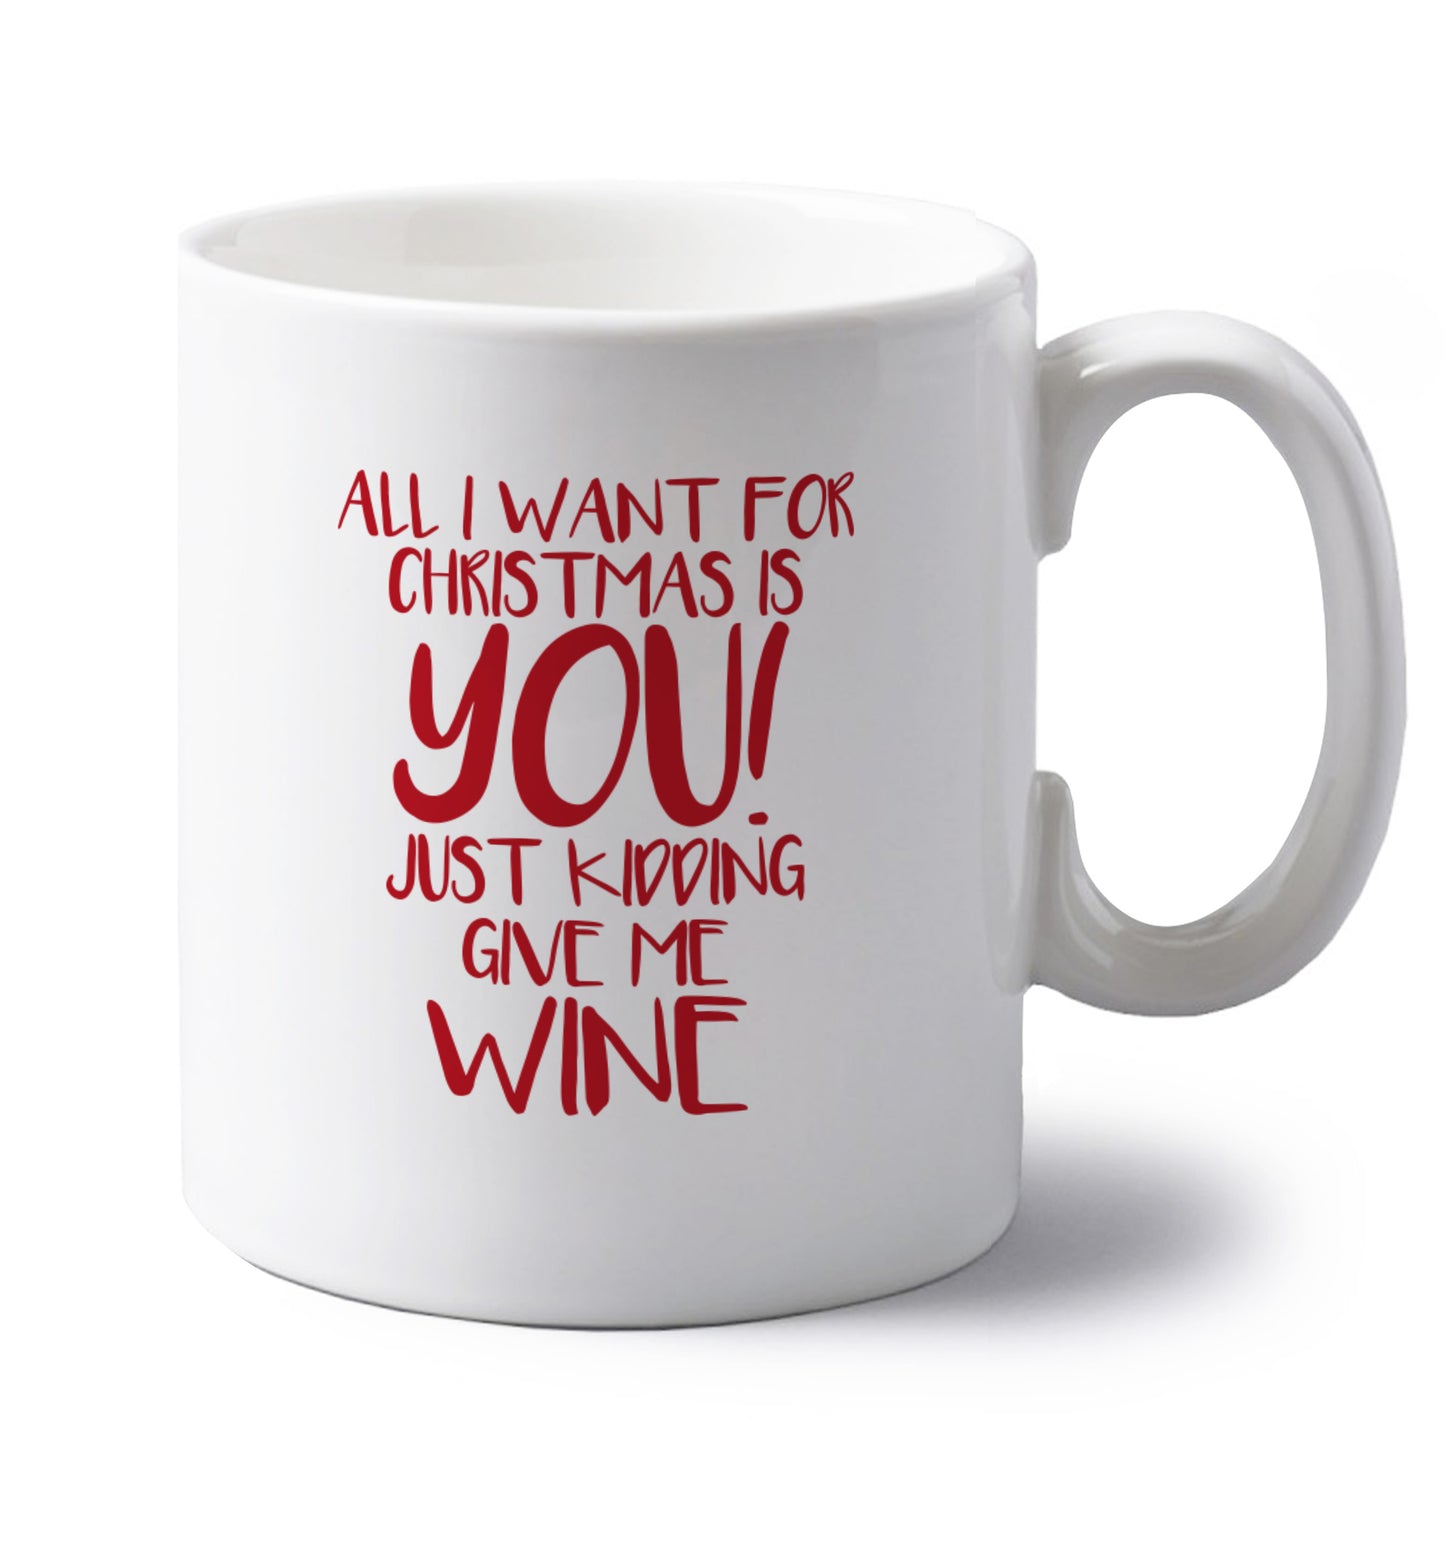 All I want for christmas is you just kidding give me the wine left handed white ceramic mug 